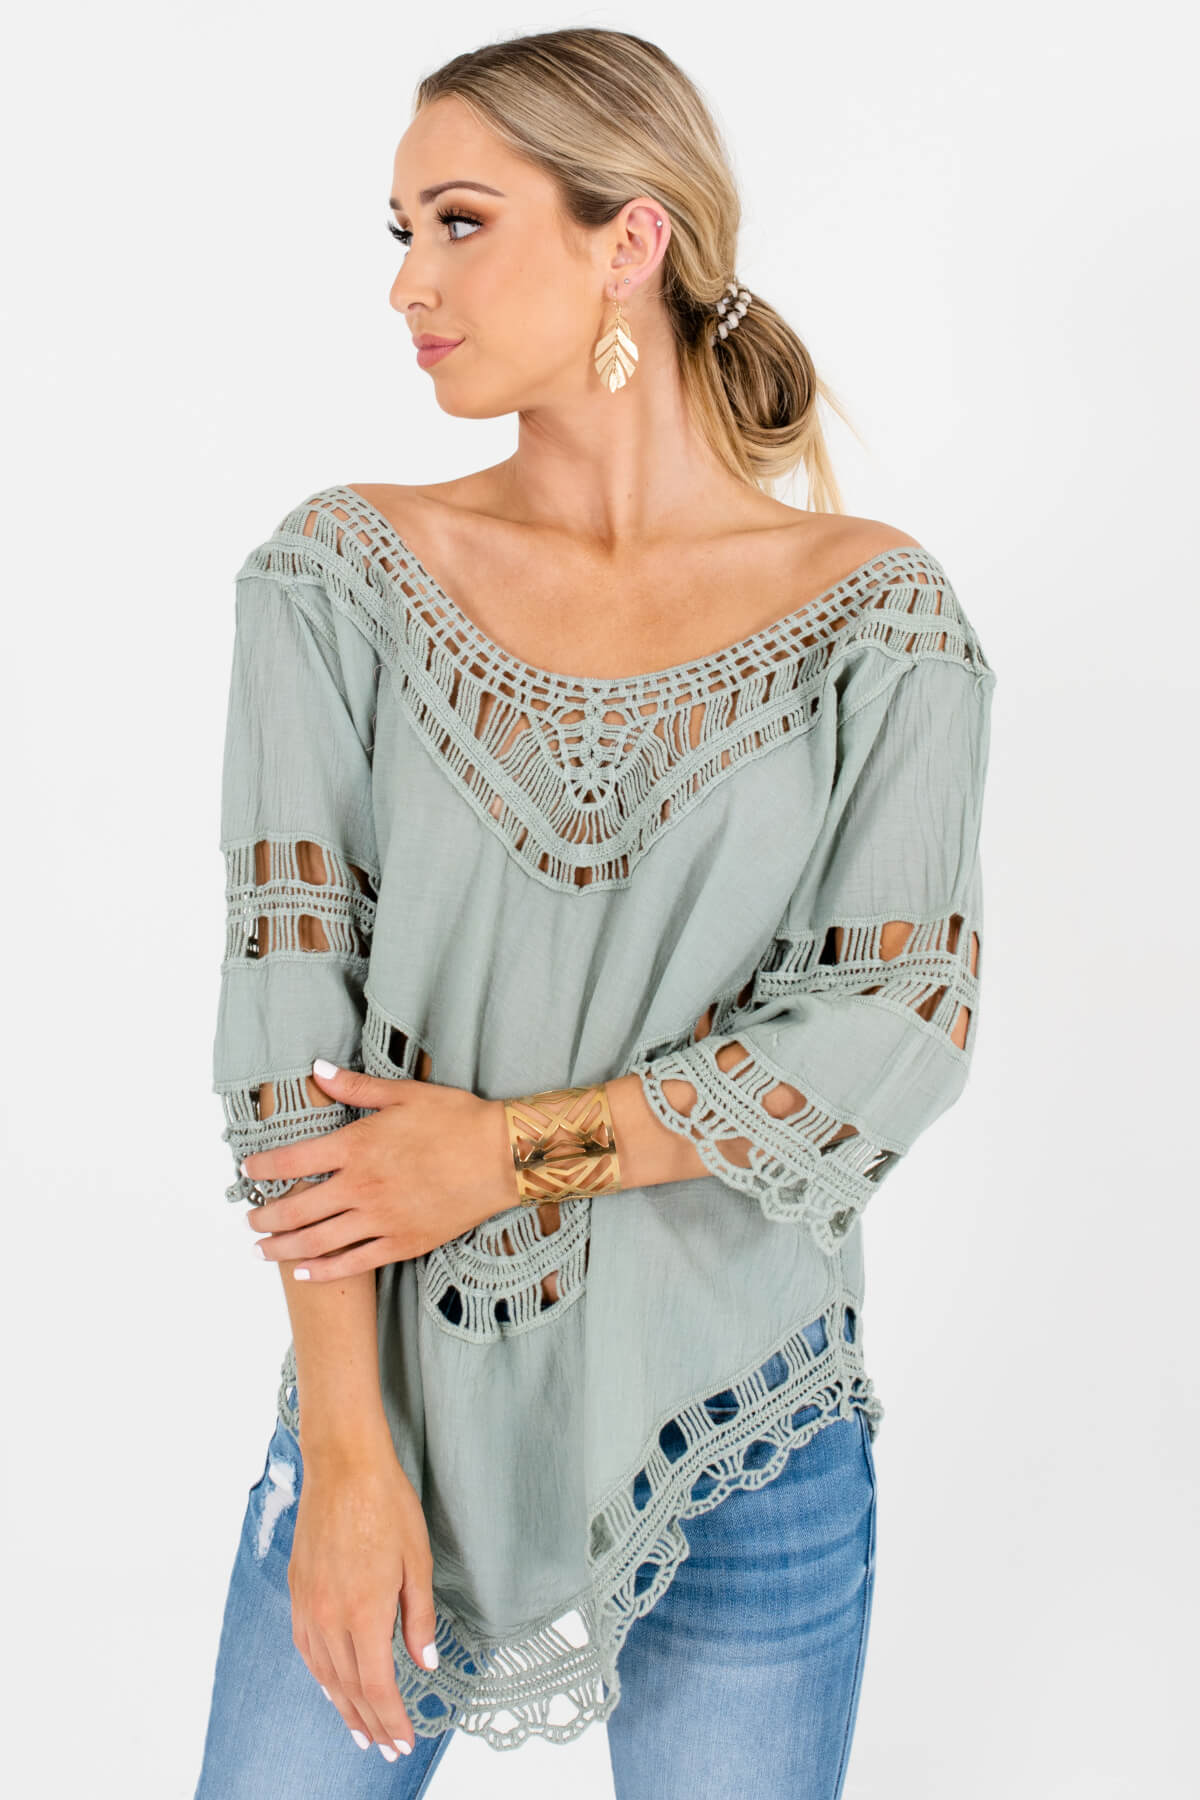 Green Cute and Comfortable Boutique Tops for Women